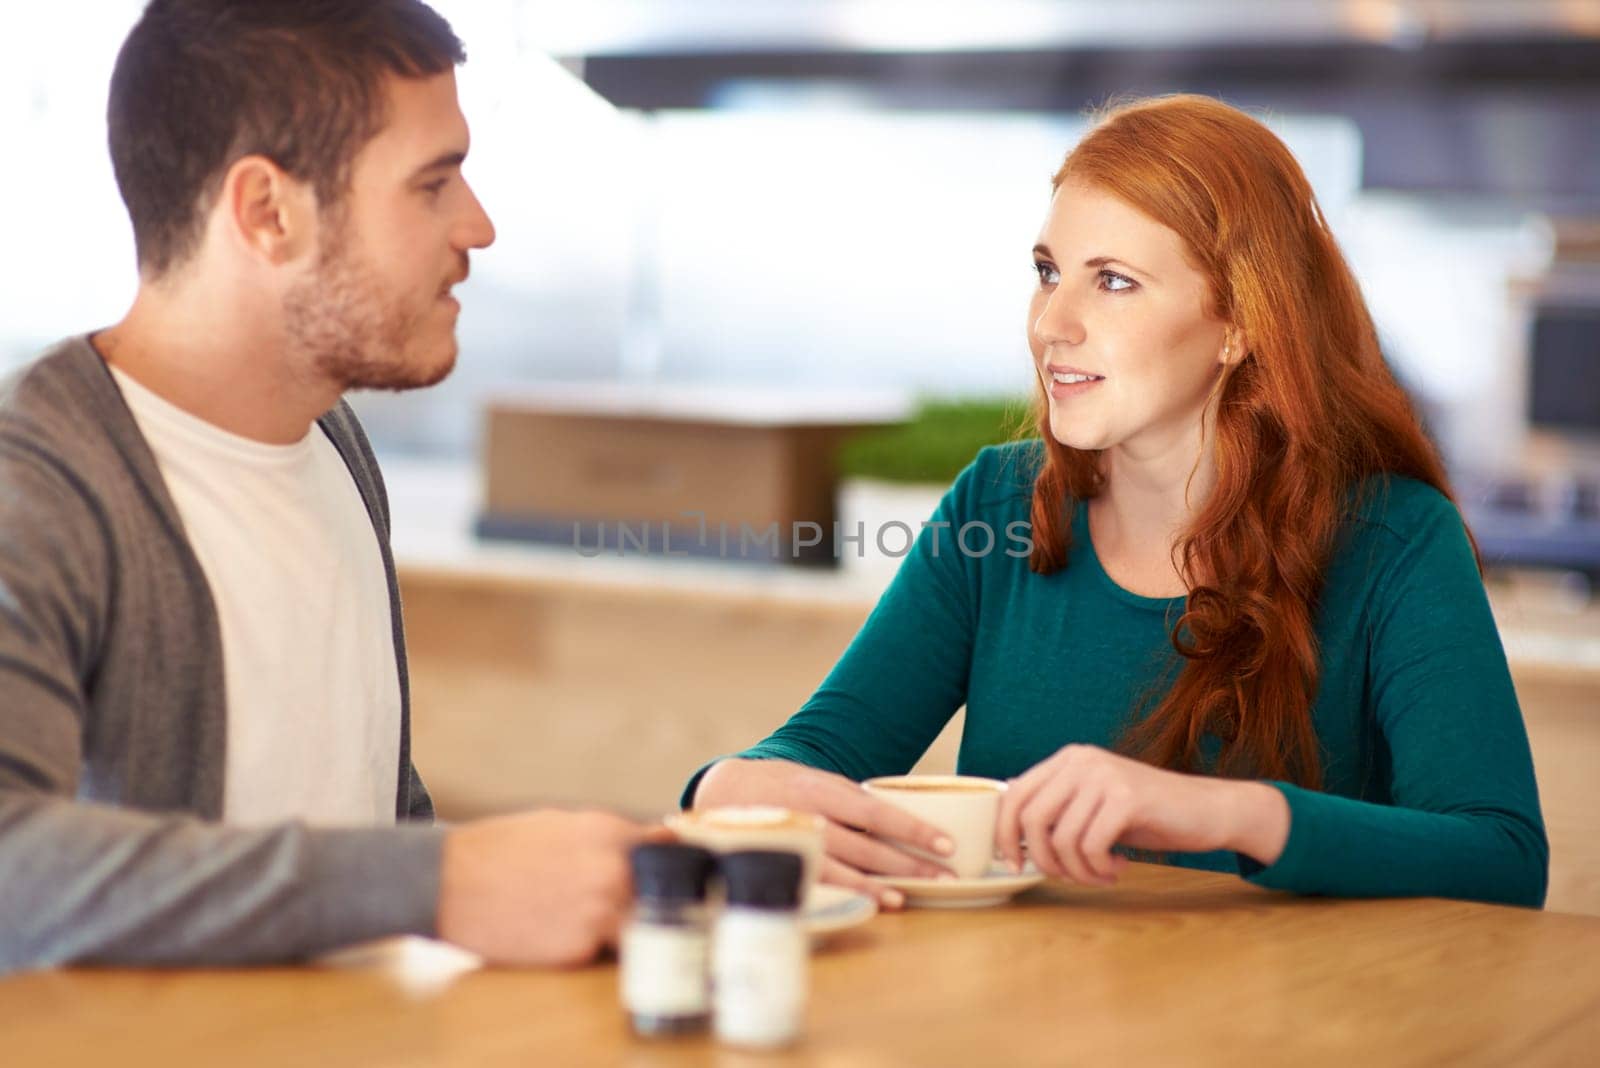 Restaurant, date and couple with coffee, love and conversation with romance and flirt. Cafe, man and woman with morning tea and bonding together with care and relationship with marriage and trust.